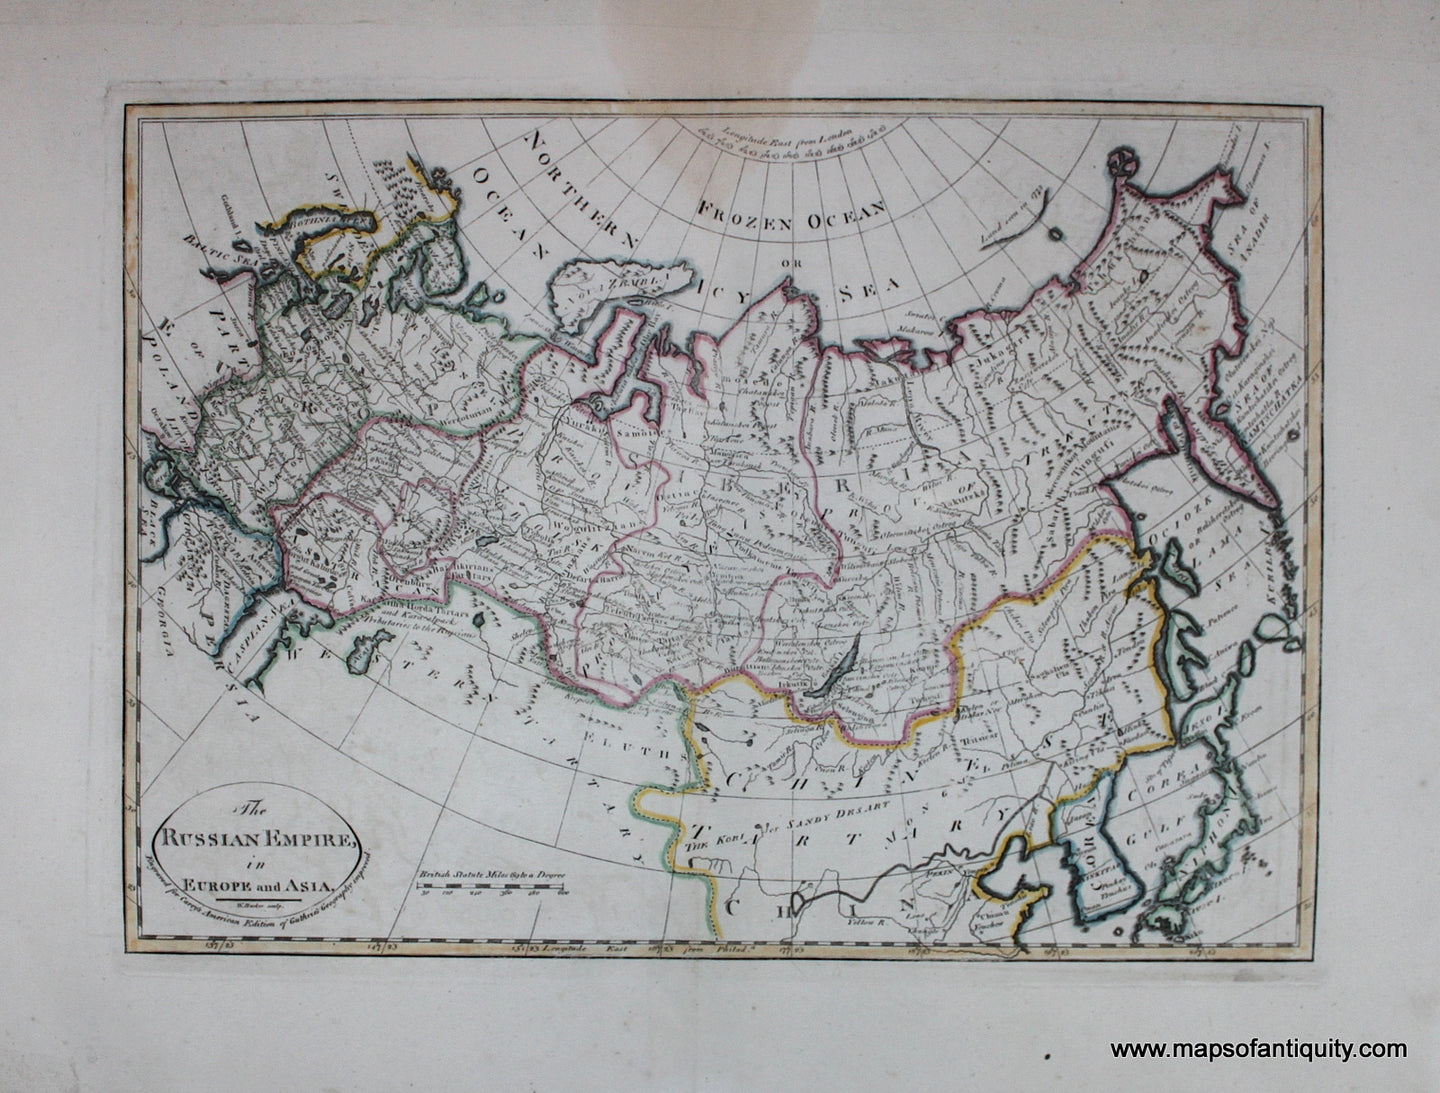 Hand-Colored-Engrave-Antique-Map-The-Russian-Empire-in-Europe-and-Asia.**********-Russia-in-Asia-Russia-in-Europe-1796-Mathew-Carey-Maps-Of-Antiquity